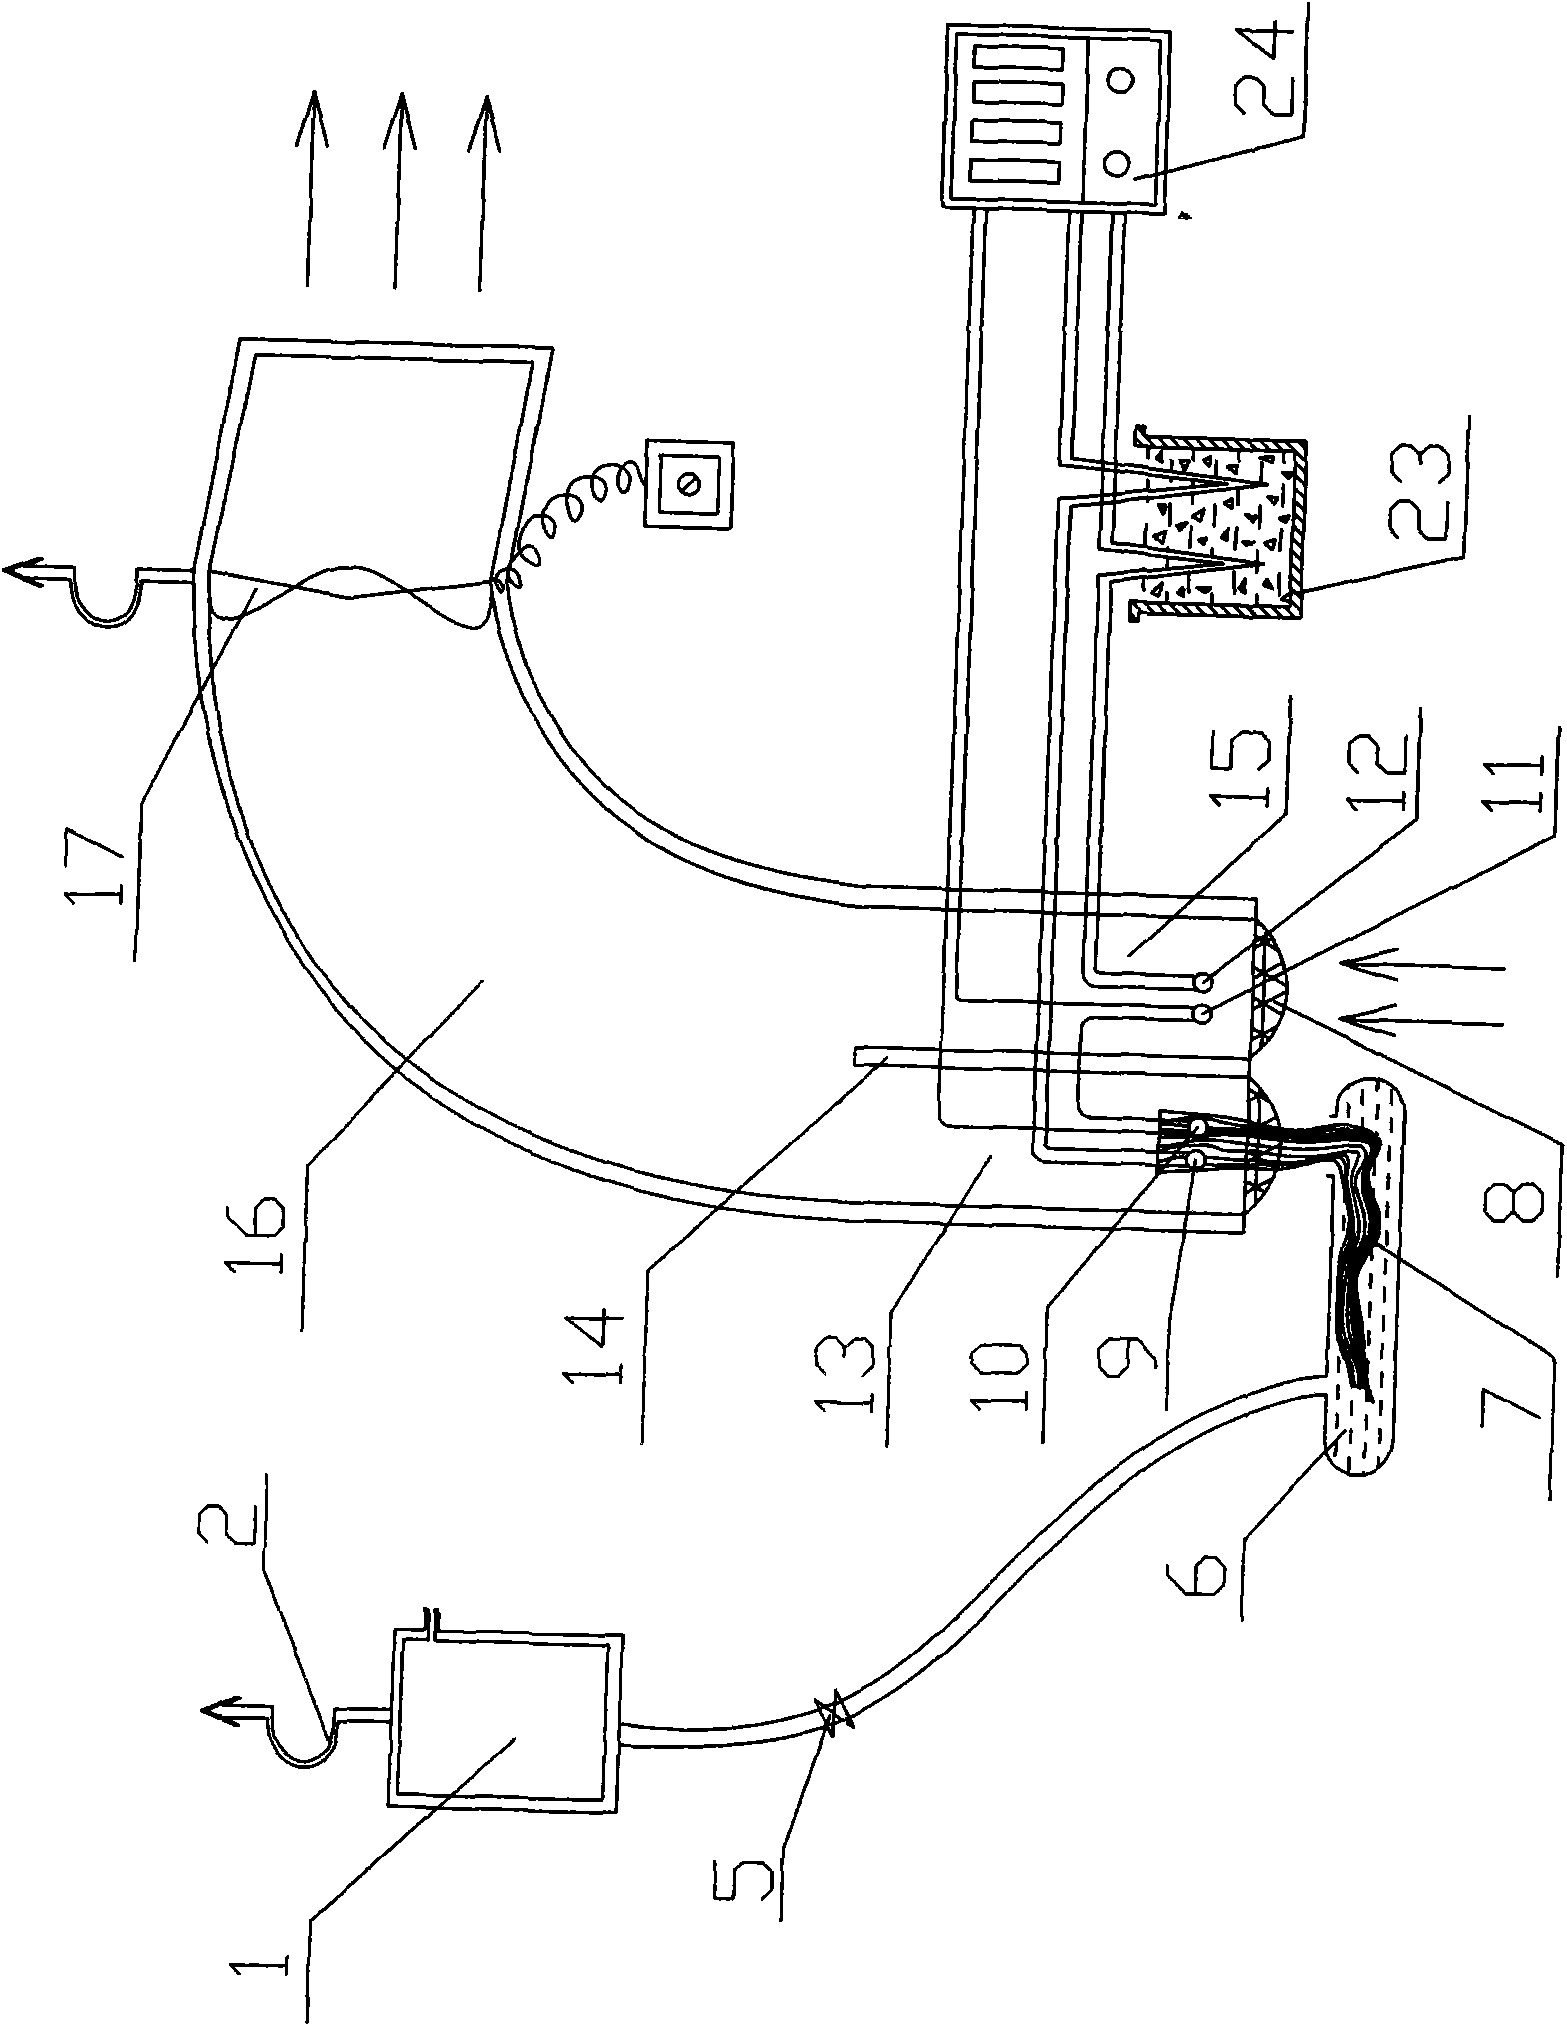 Automatically-recording type ventilating dry humidity device